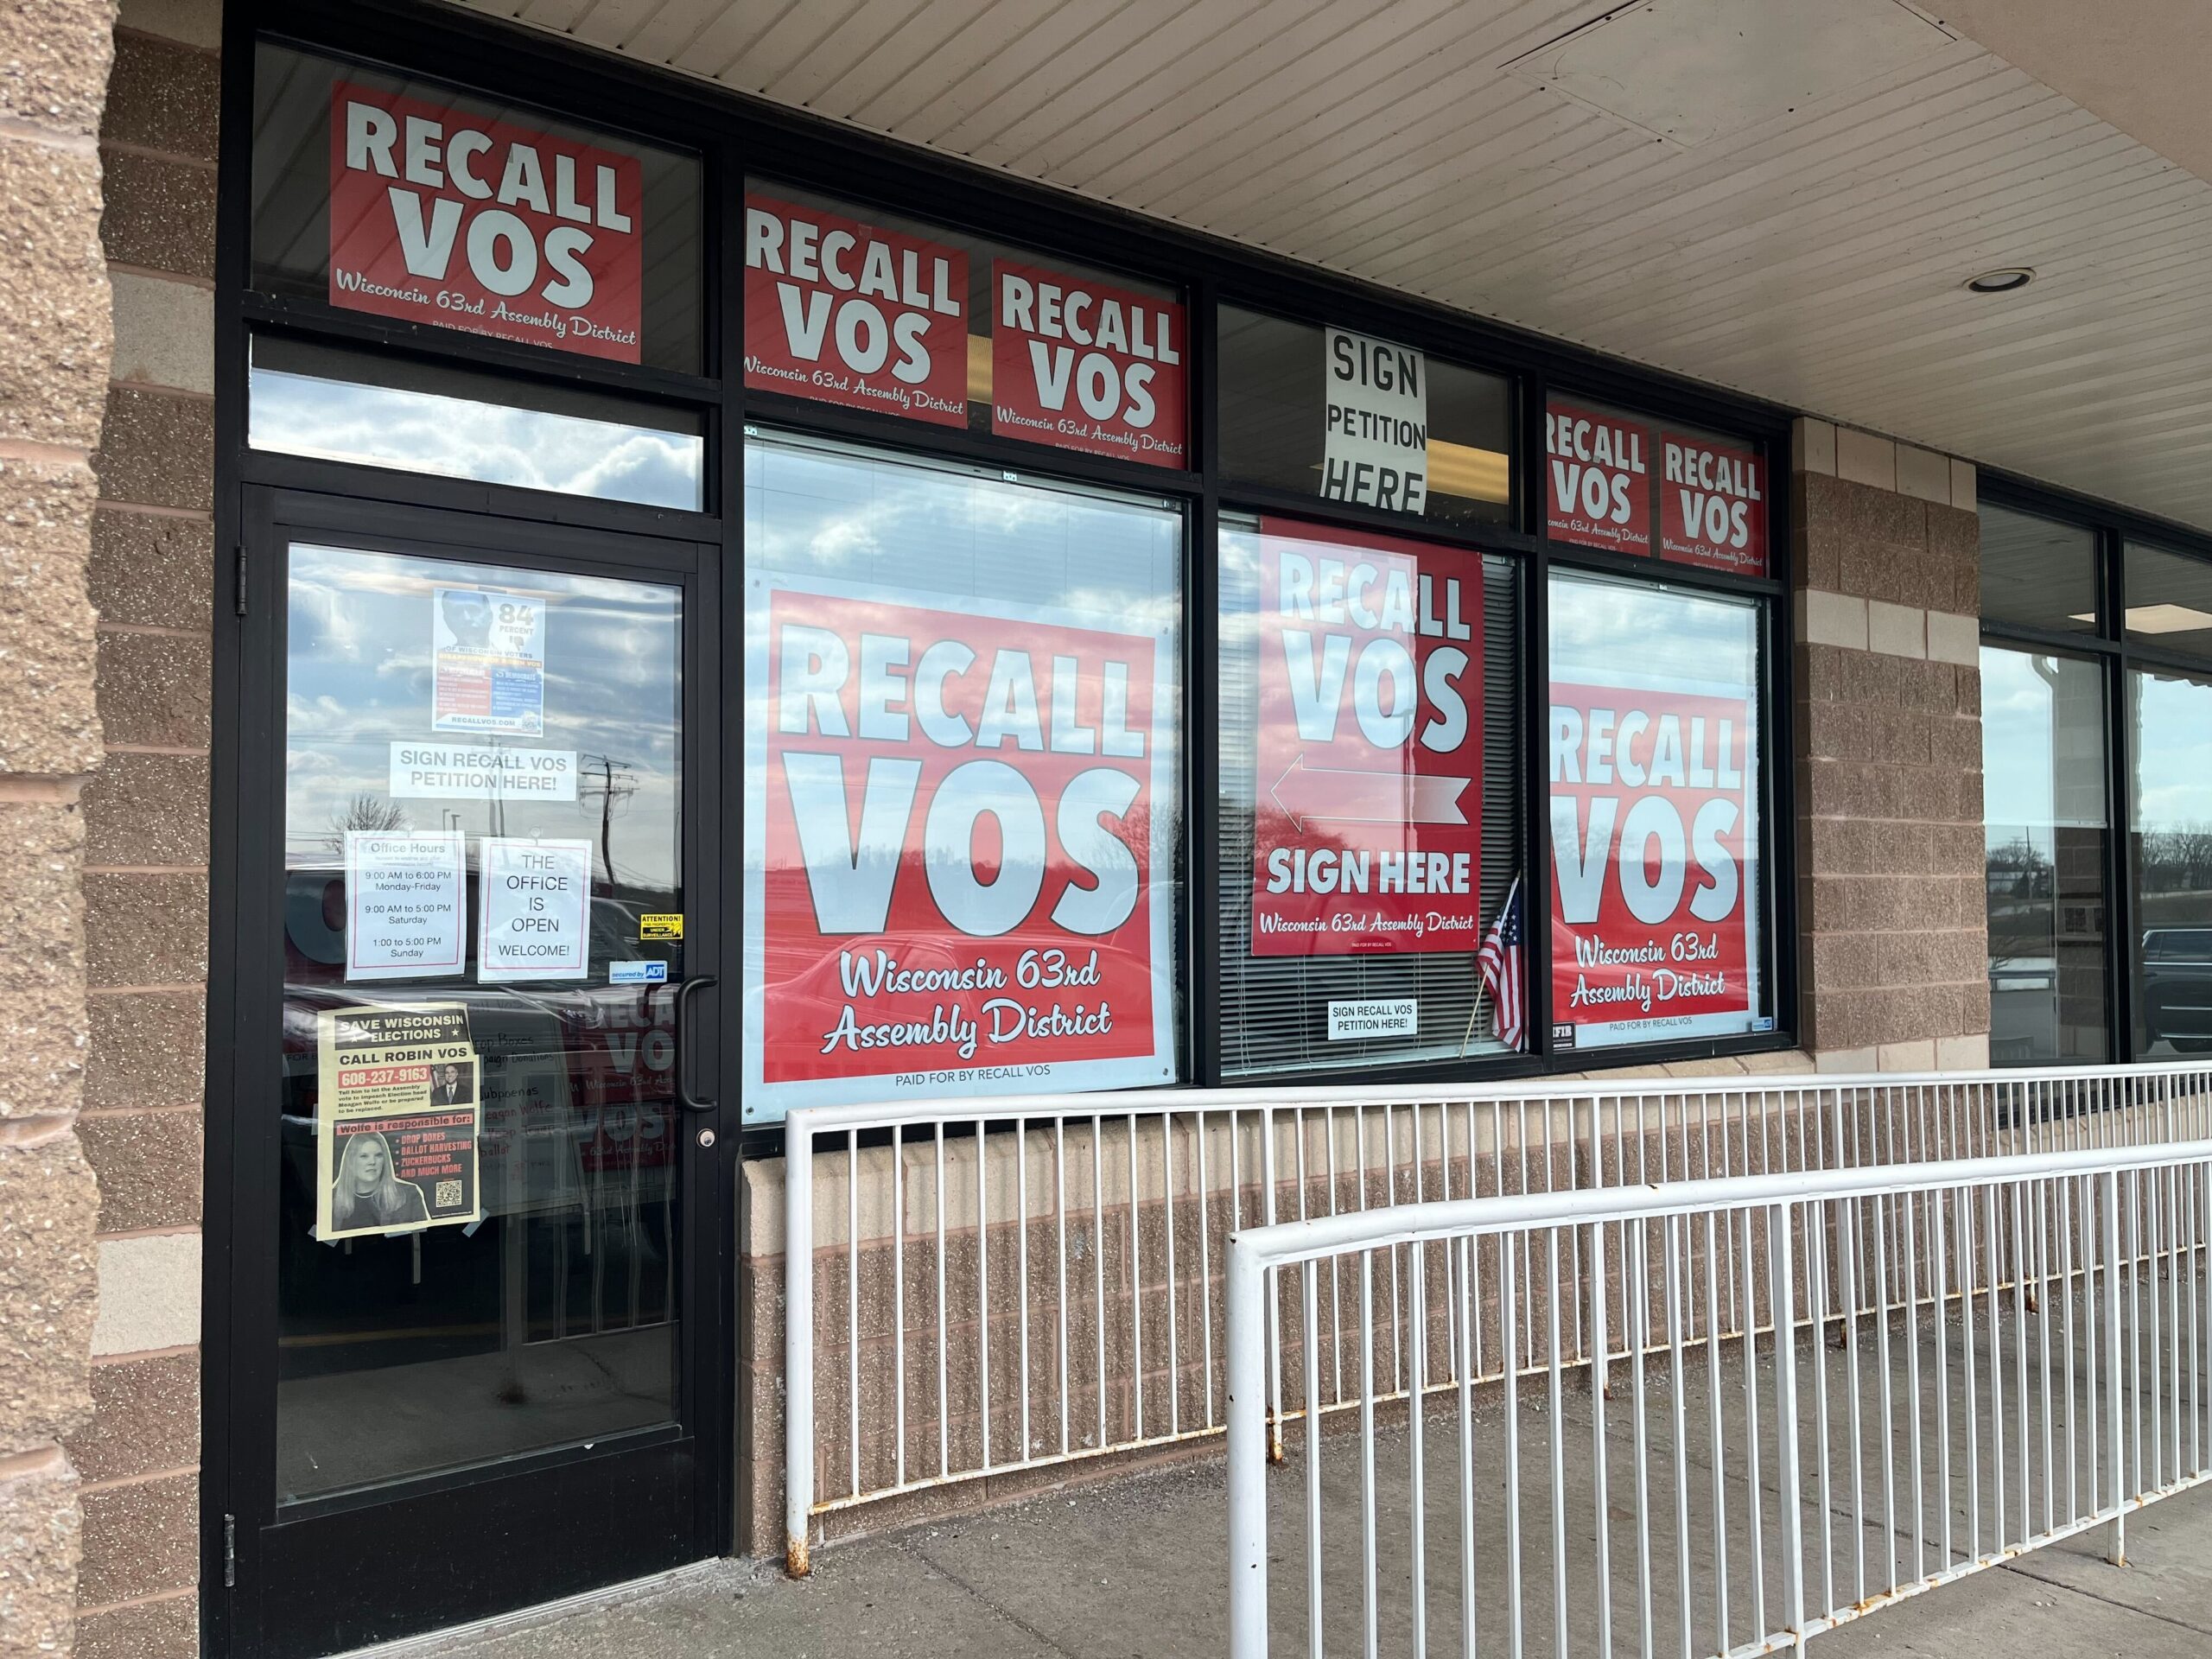 Windows of a storefront have red signs saying "RECALL VOS" in white letters